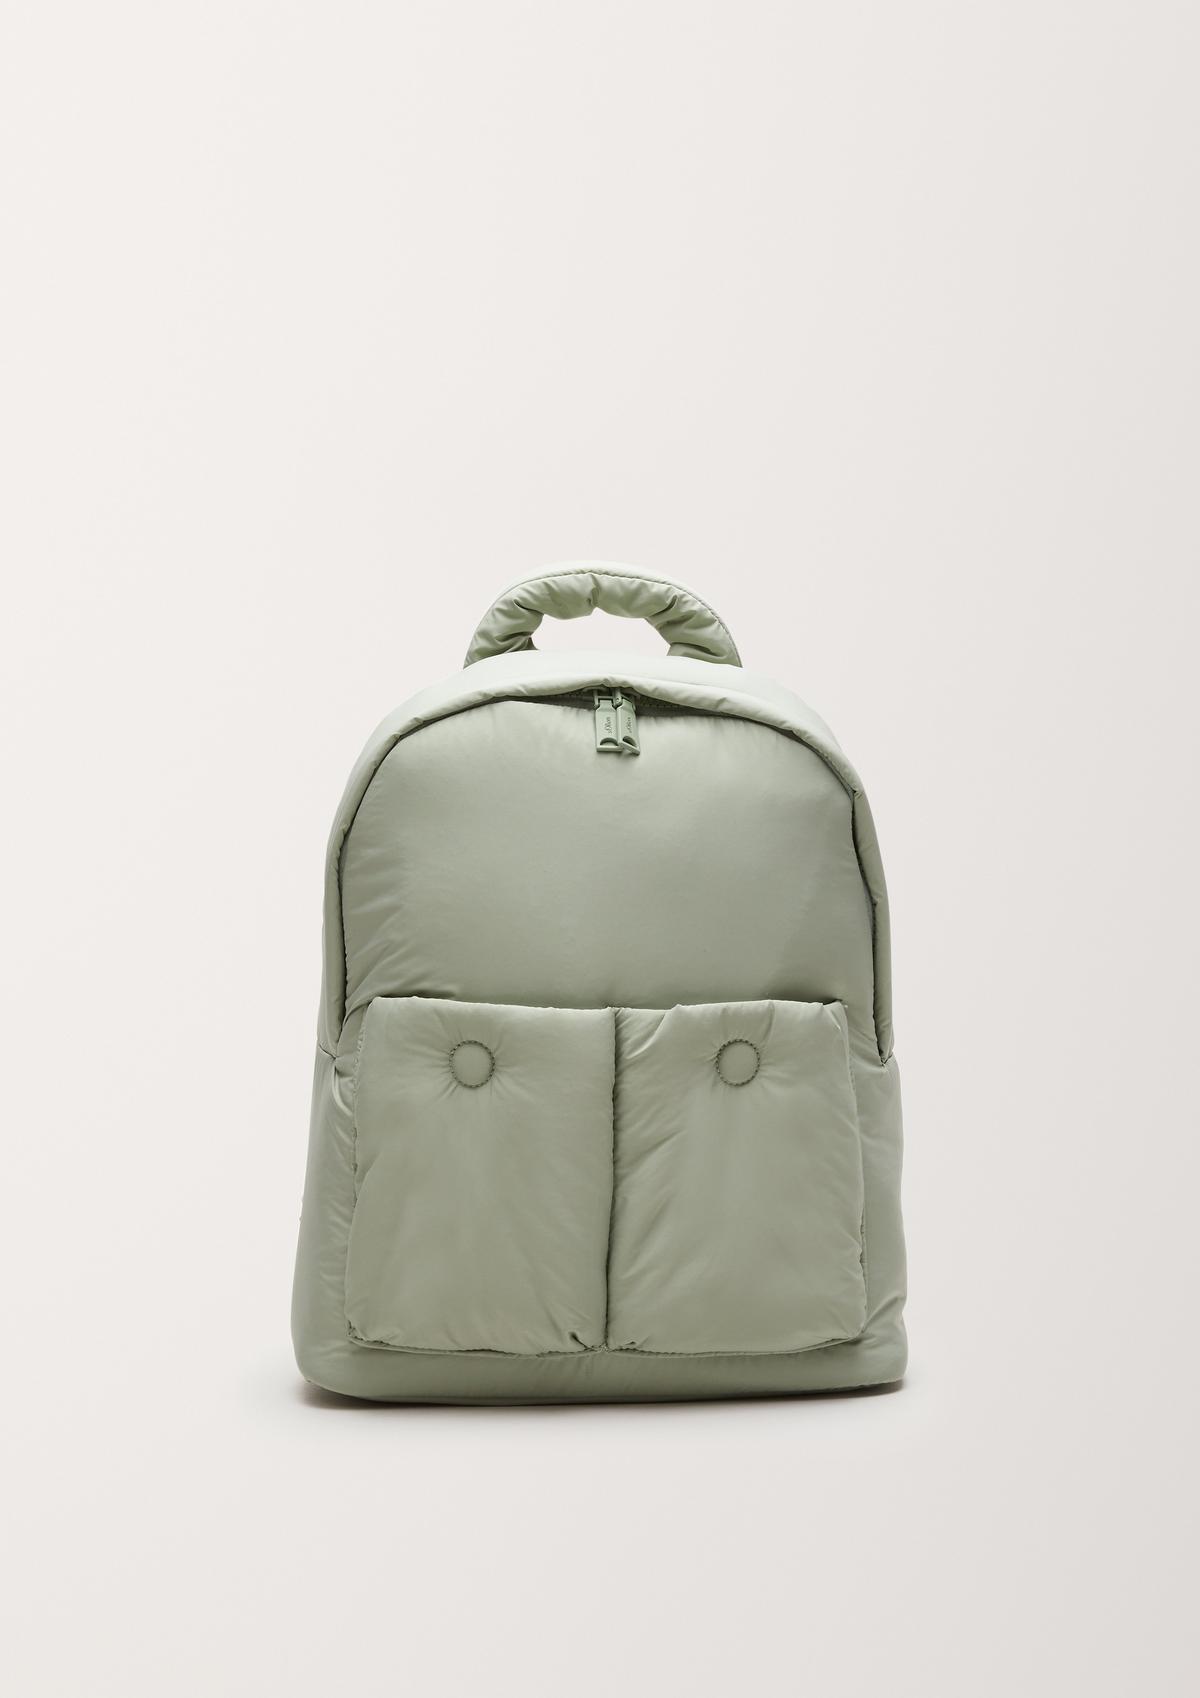 Rucksack with a padded compartment